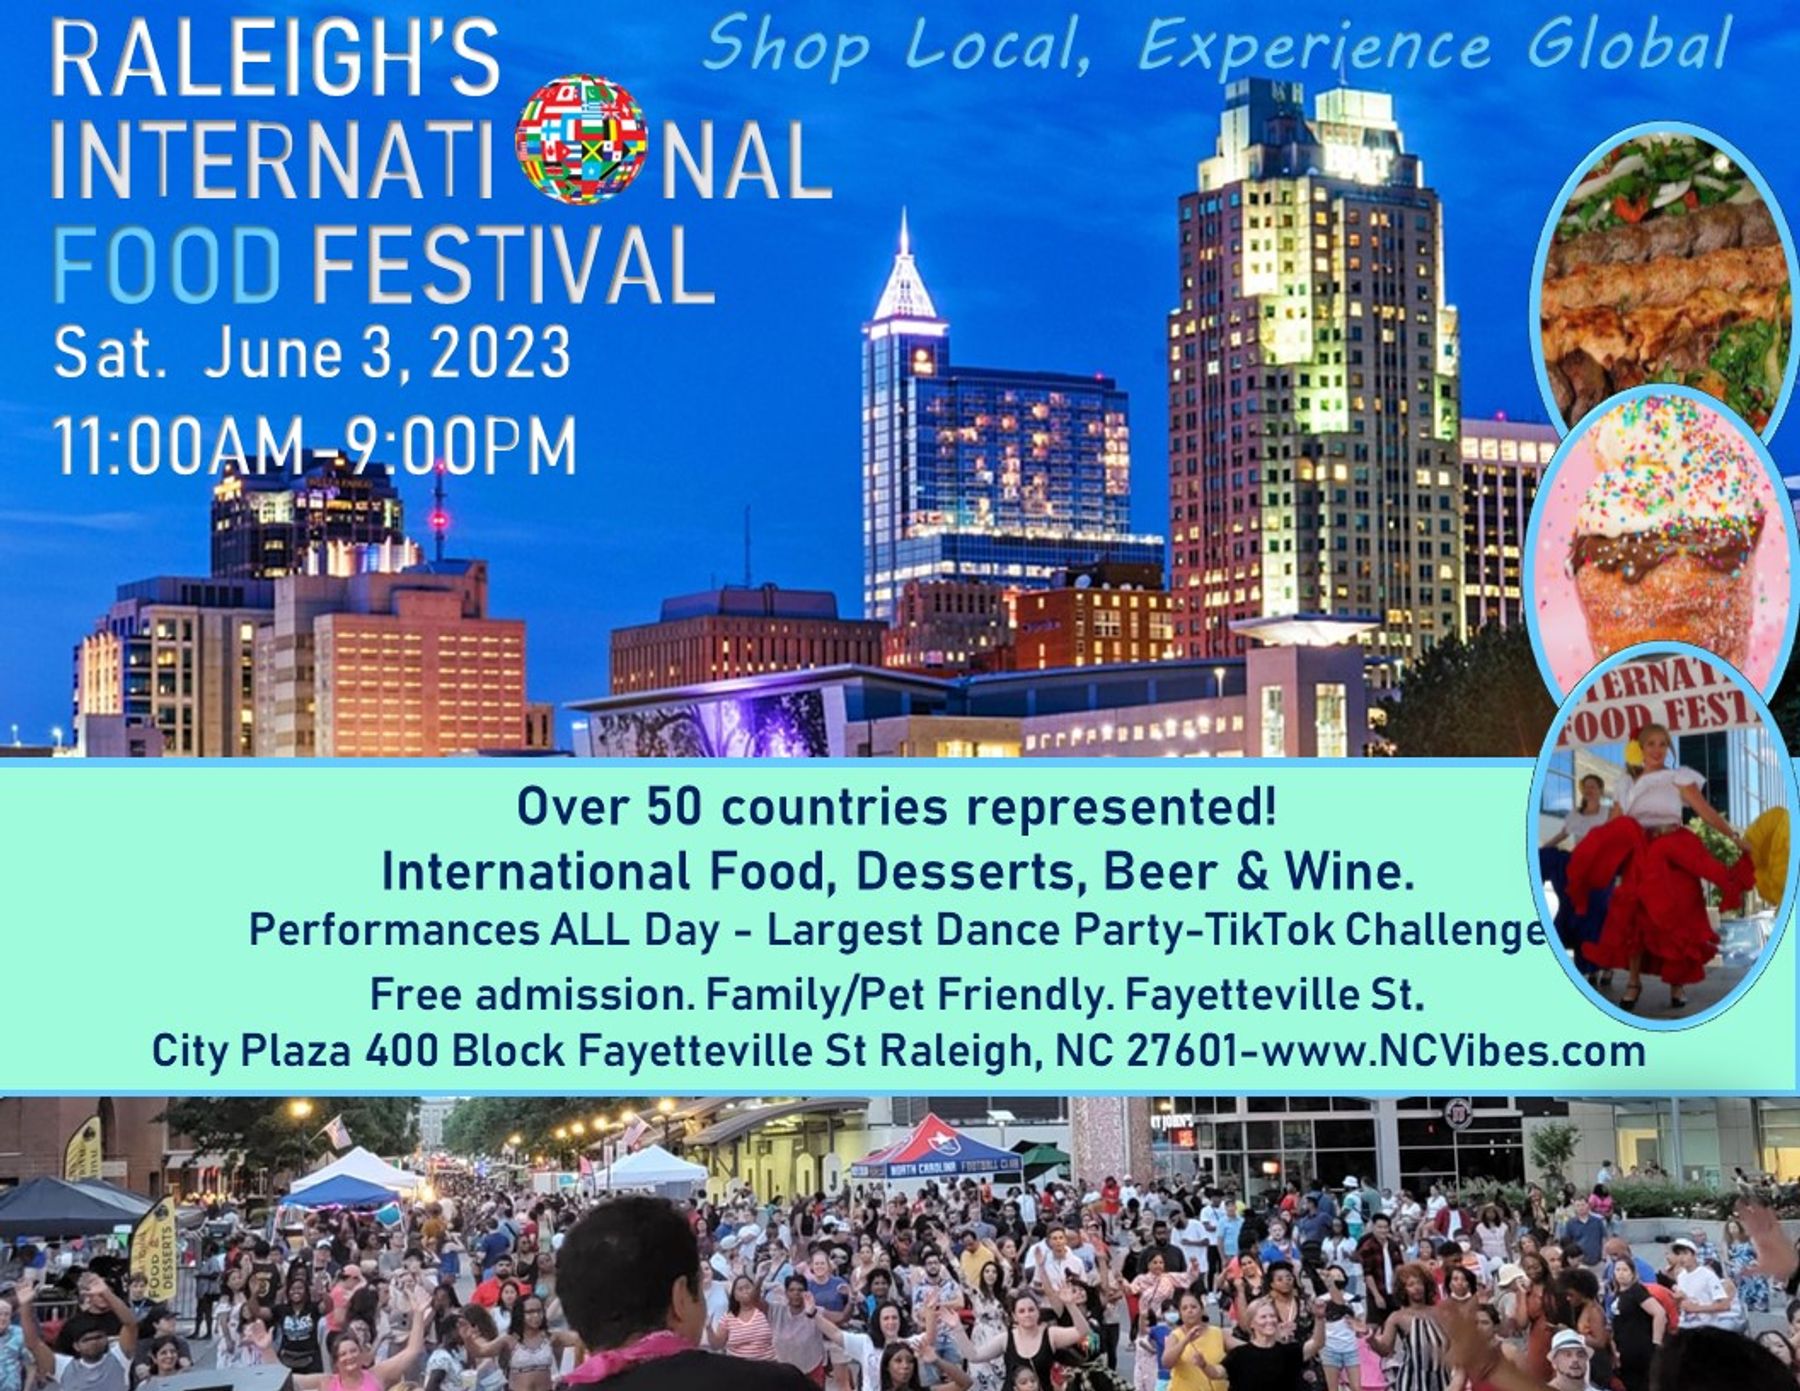 Raleigh's International Food Festival Free Admission Downtown